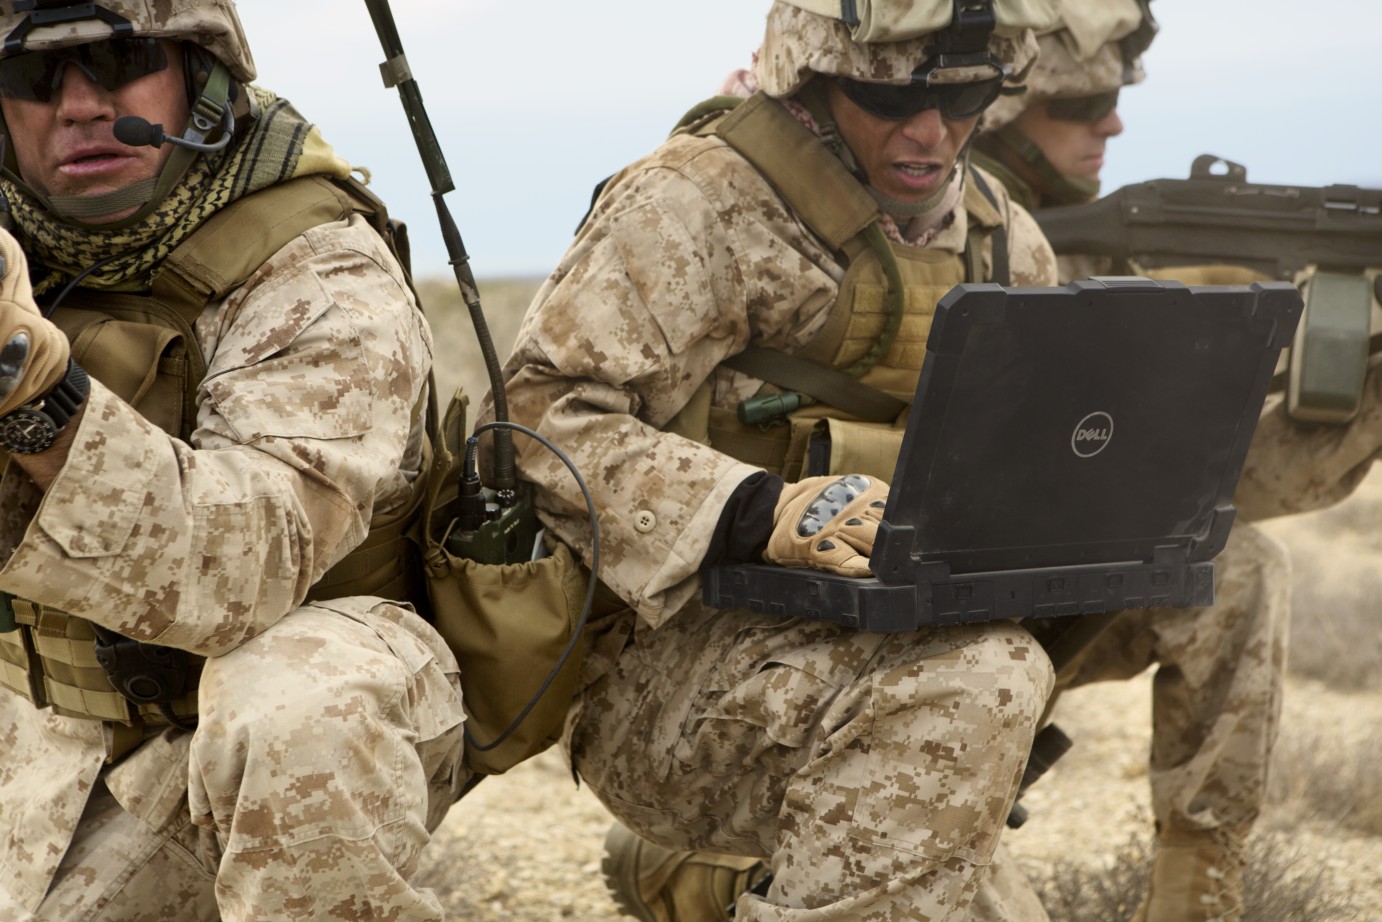 Work laptops: When bullets, fire, explosive gases are part of the job